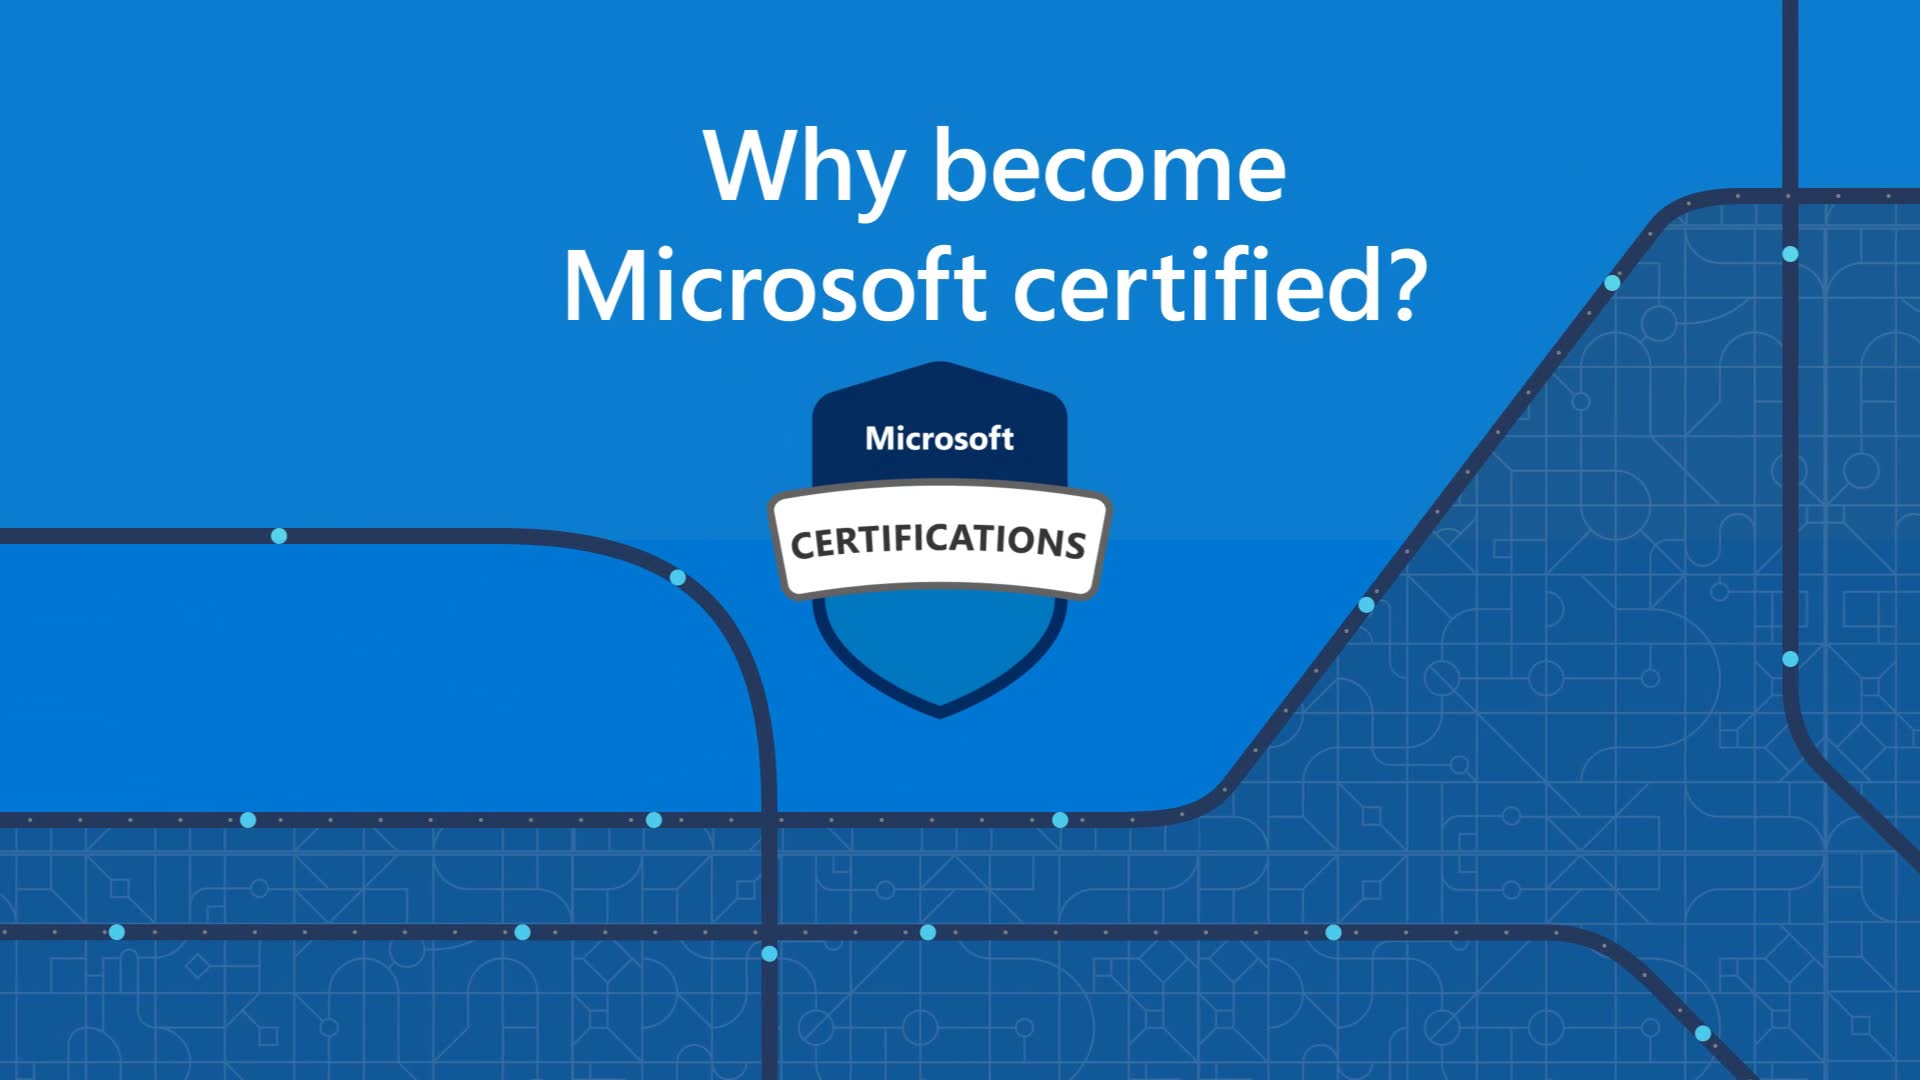 Become Microsoft certified